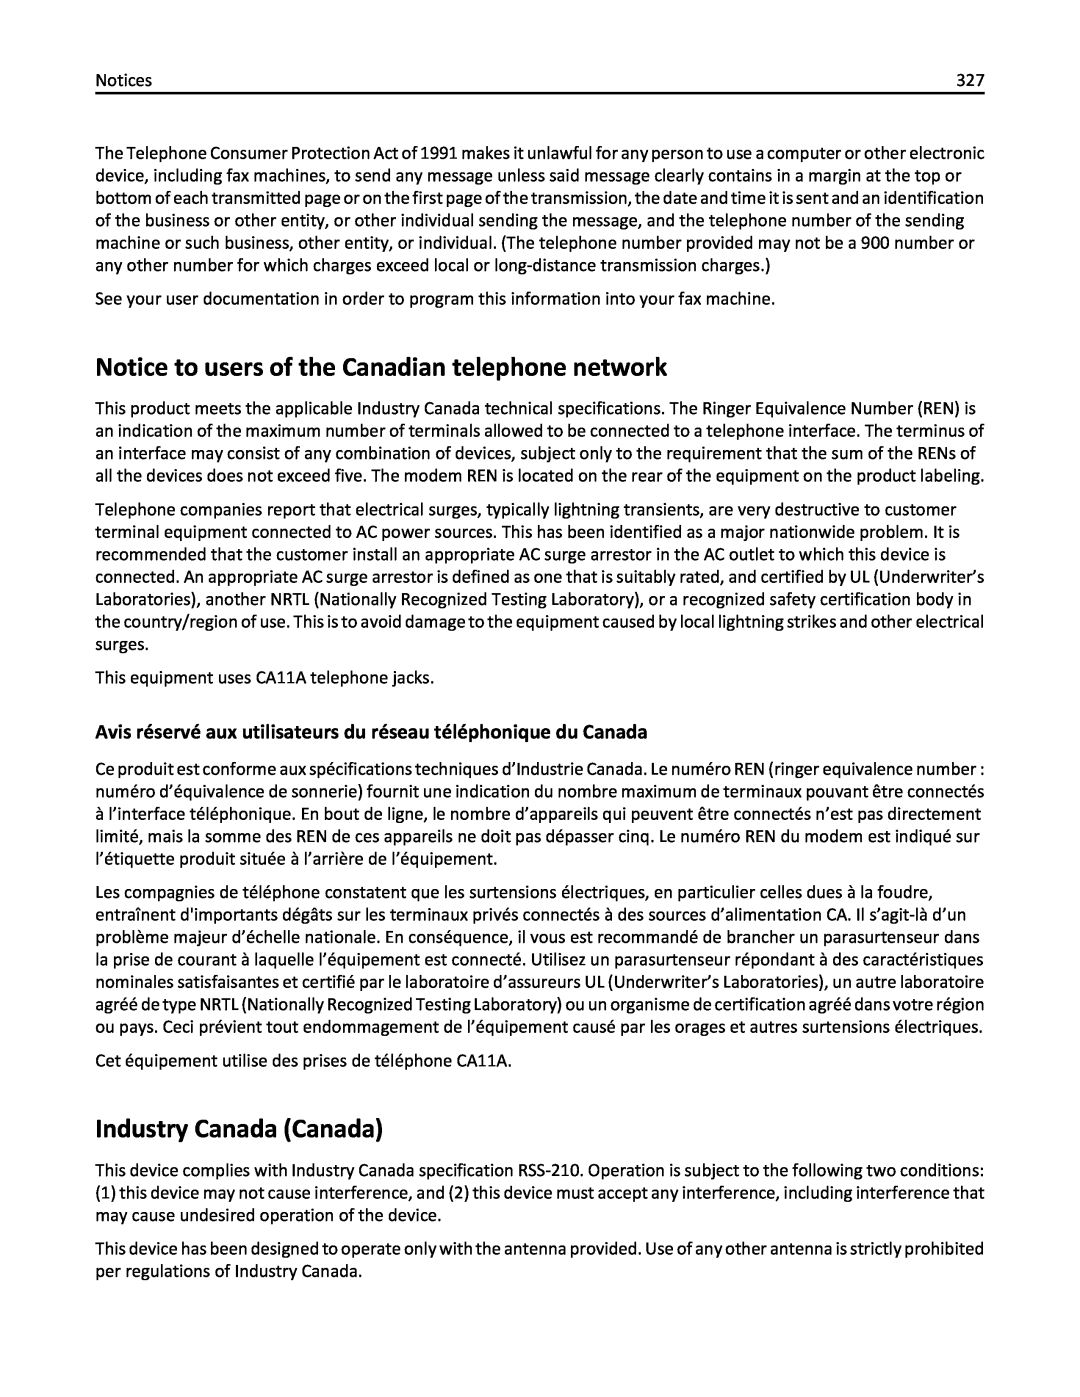 Lexmark 436 manual Notice to users of the Canadian telephone network, Industry Canada Canada 